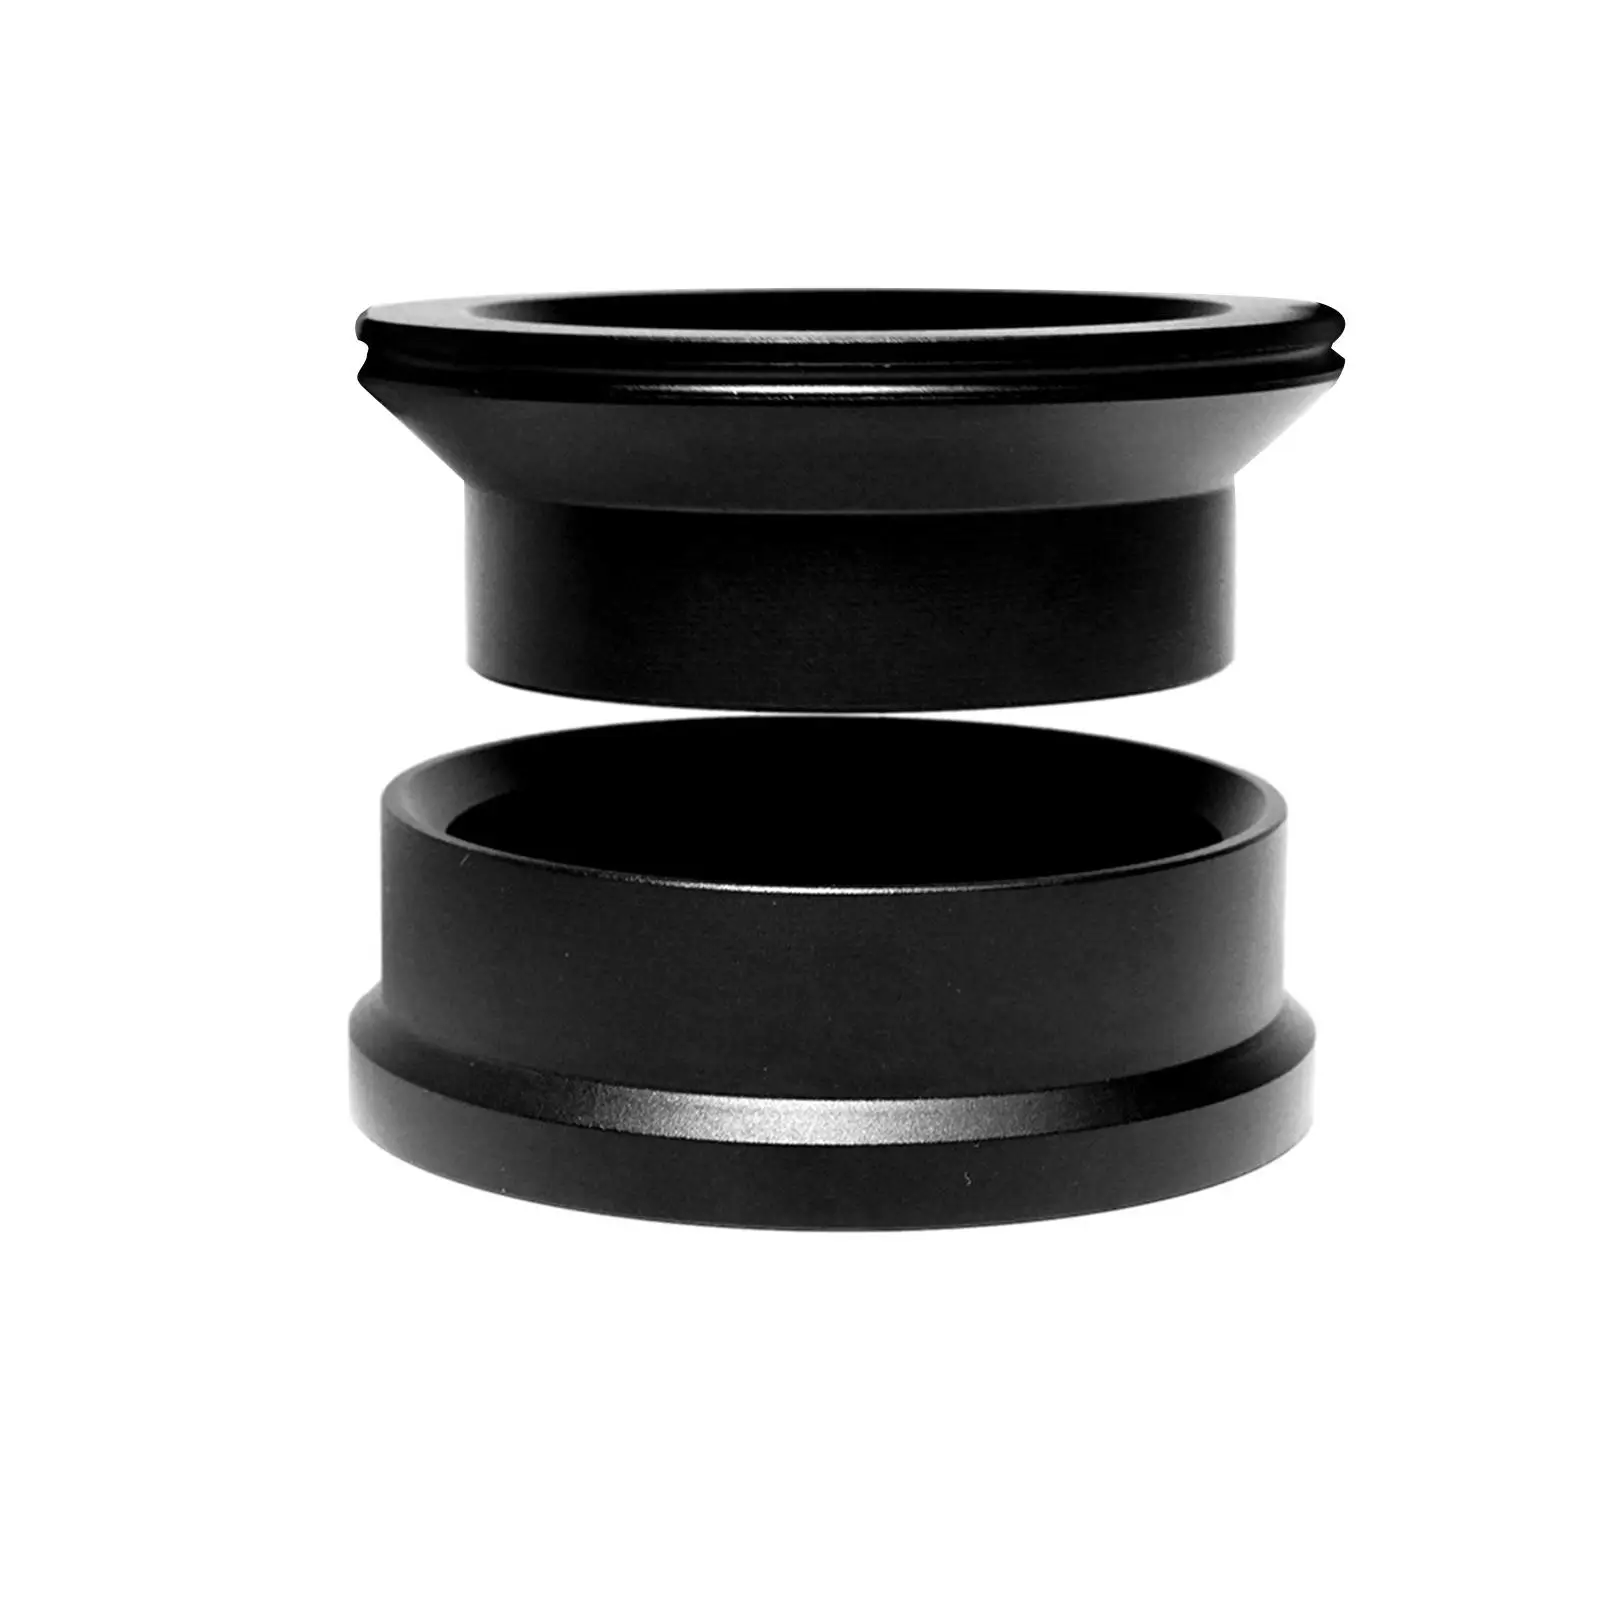 Hands Free Coffee Rings Espresso Dosing Funnel Tamper Accessories